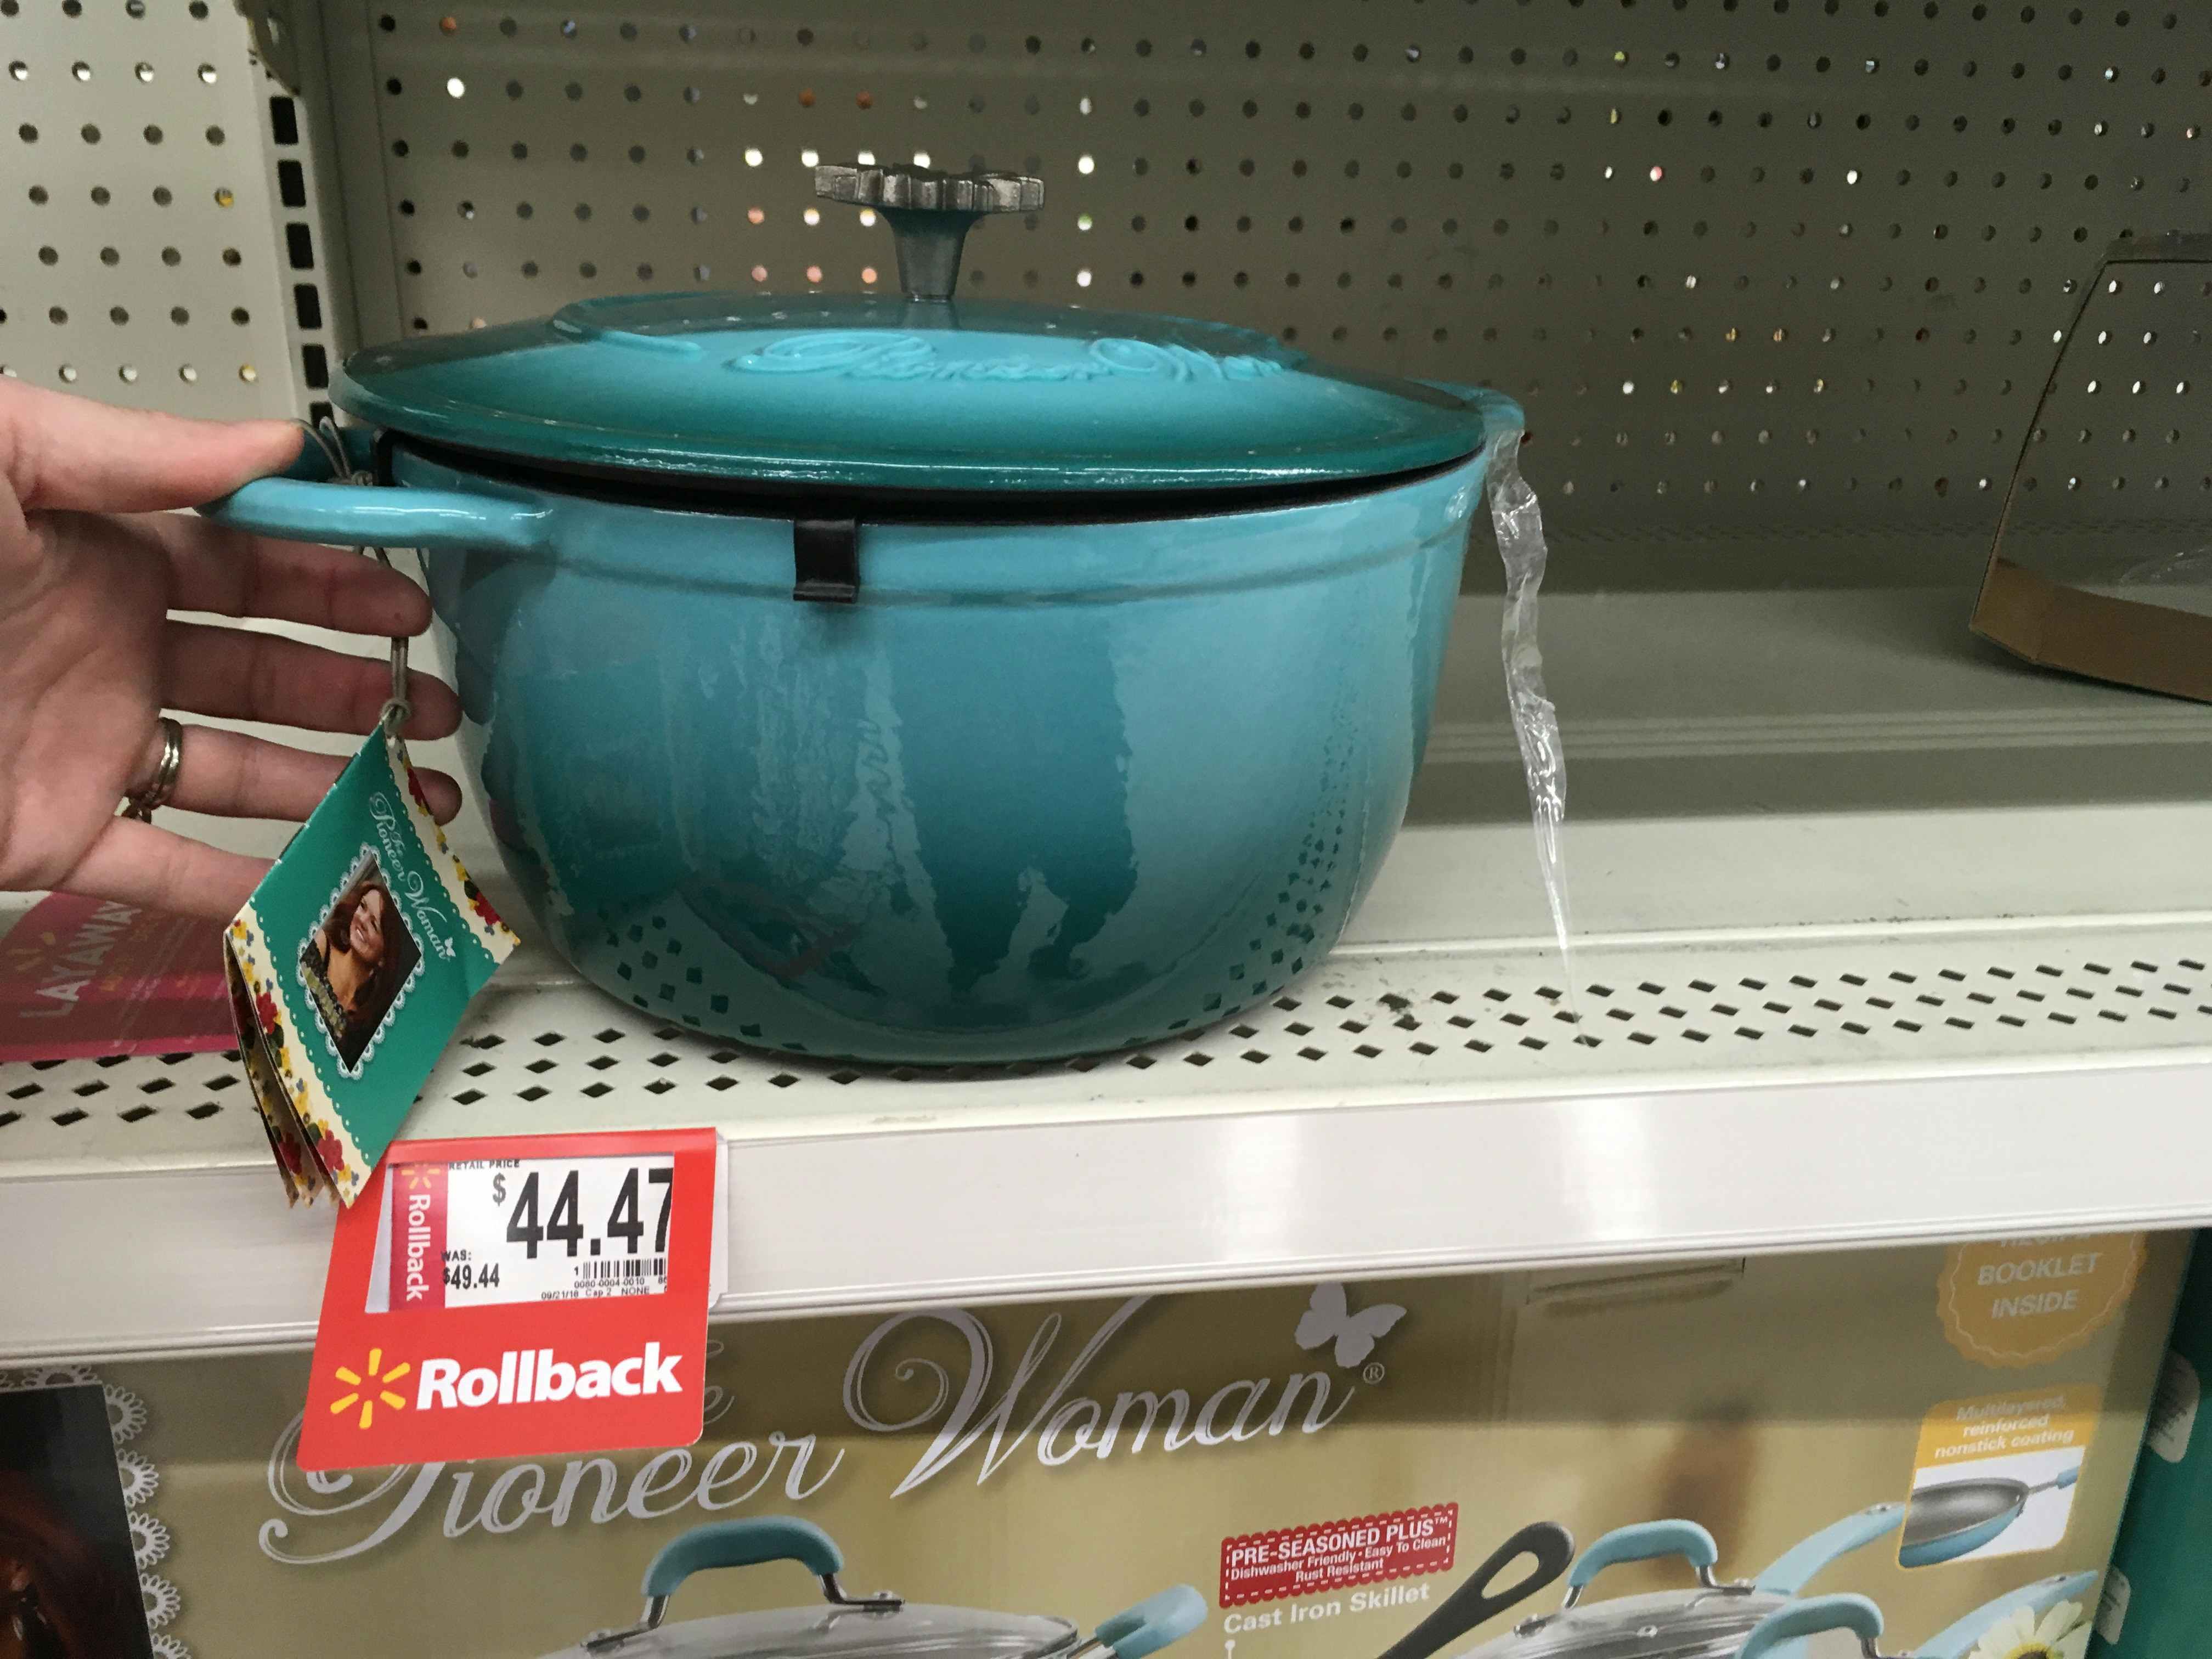 10 Best Pioneer Woman Products from Walmart Under $10